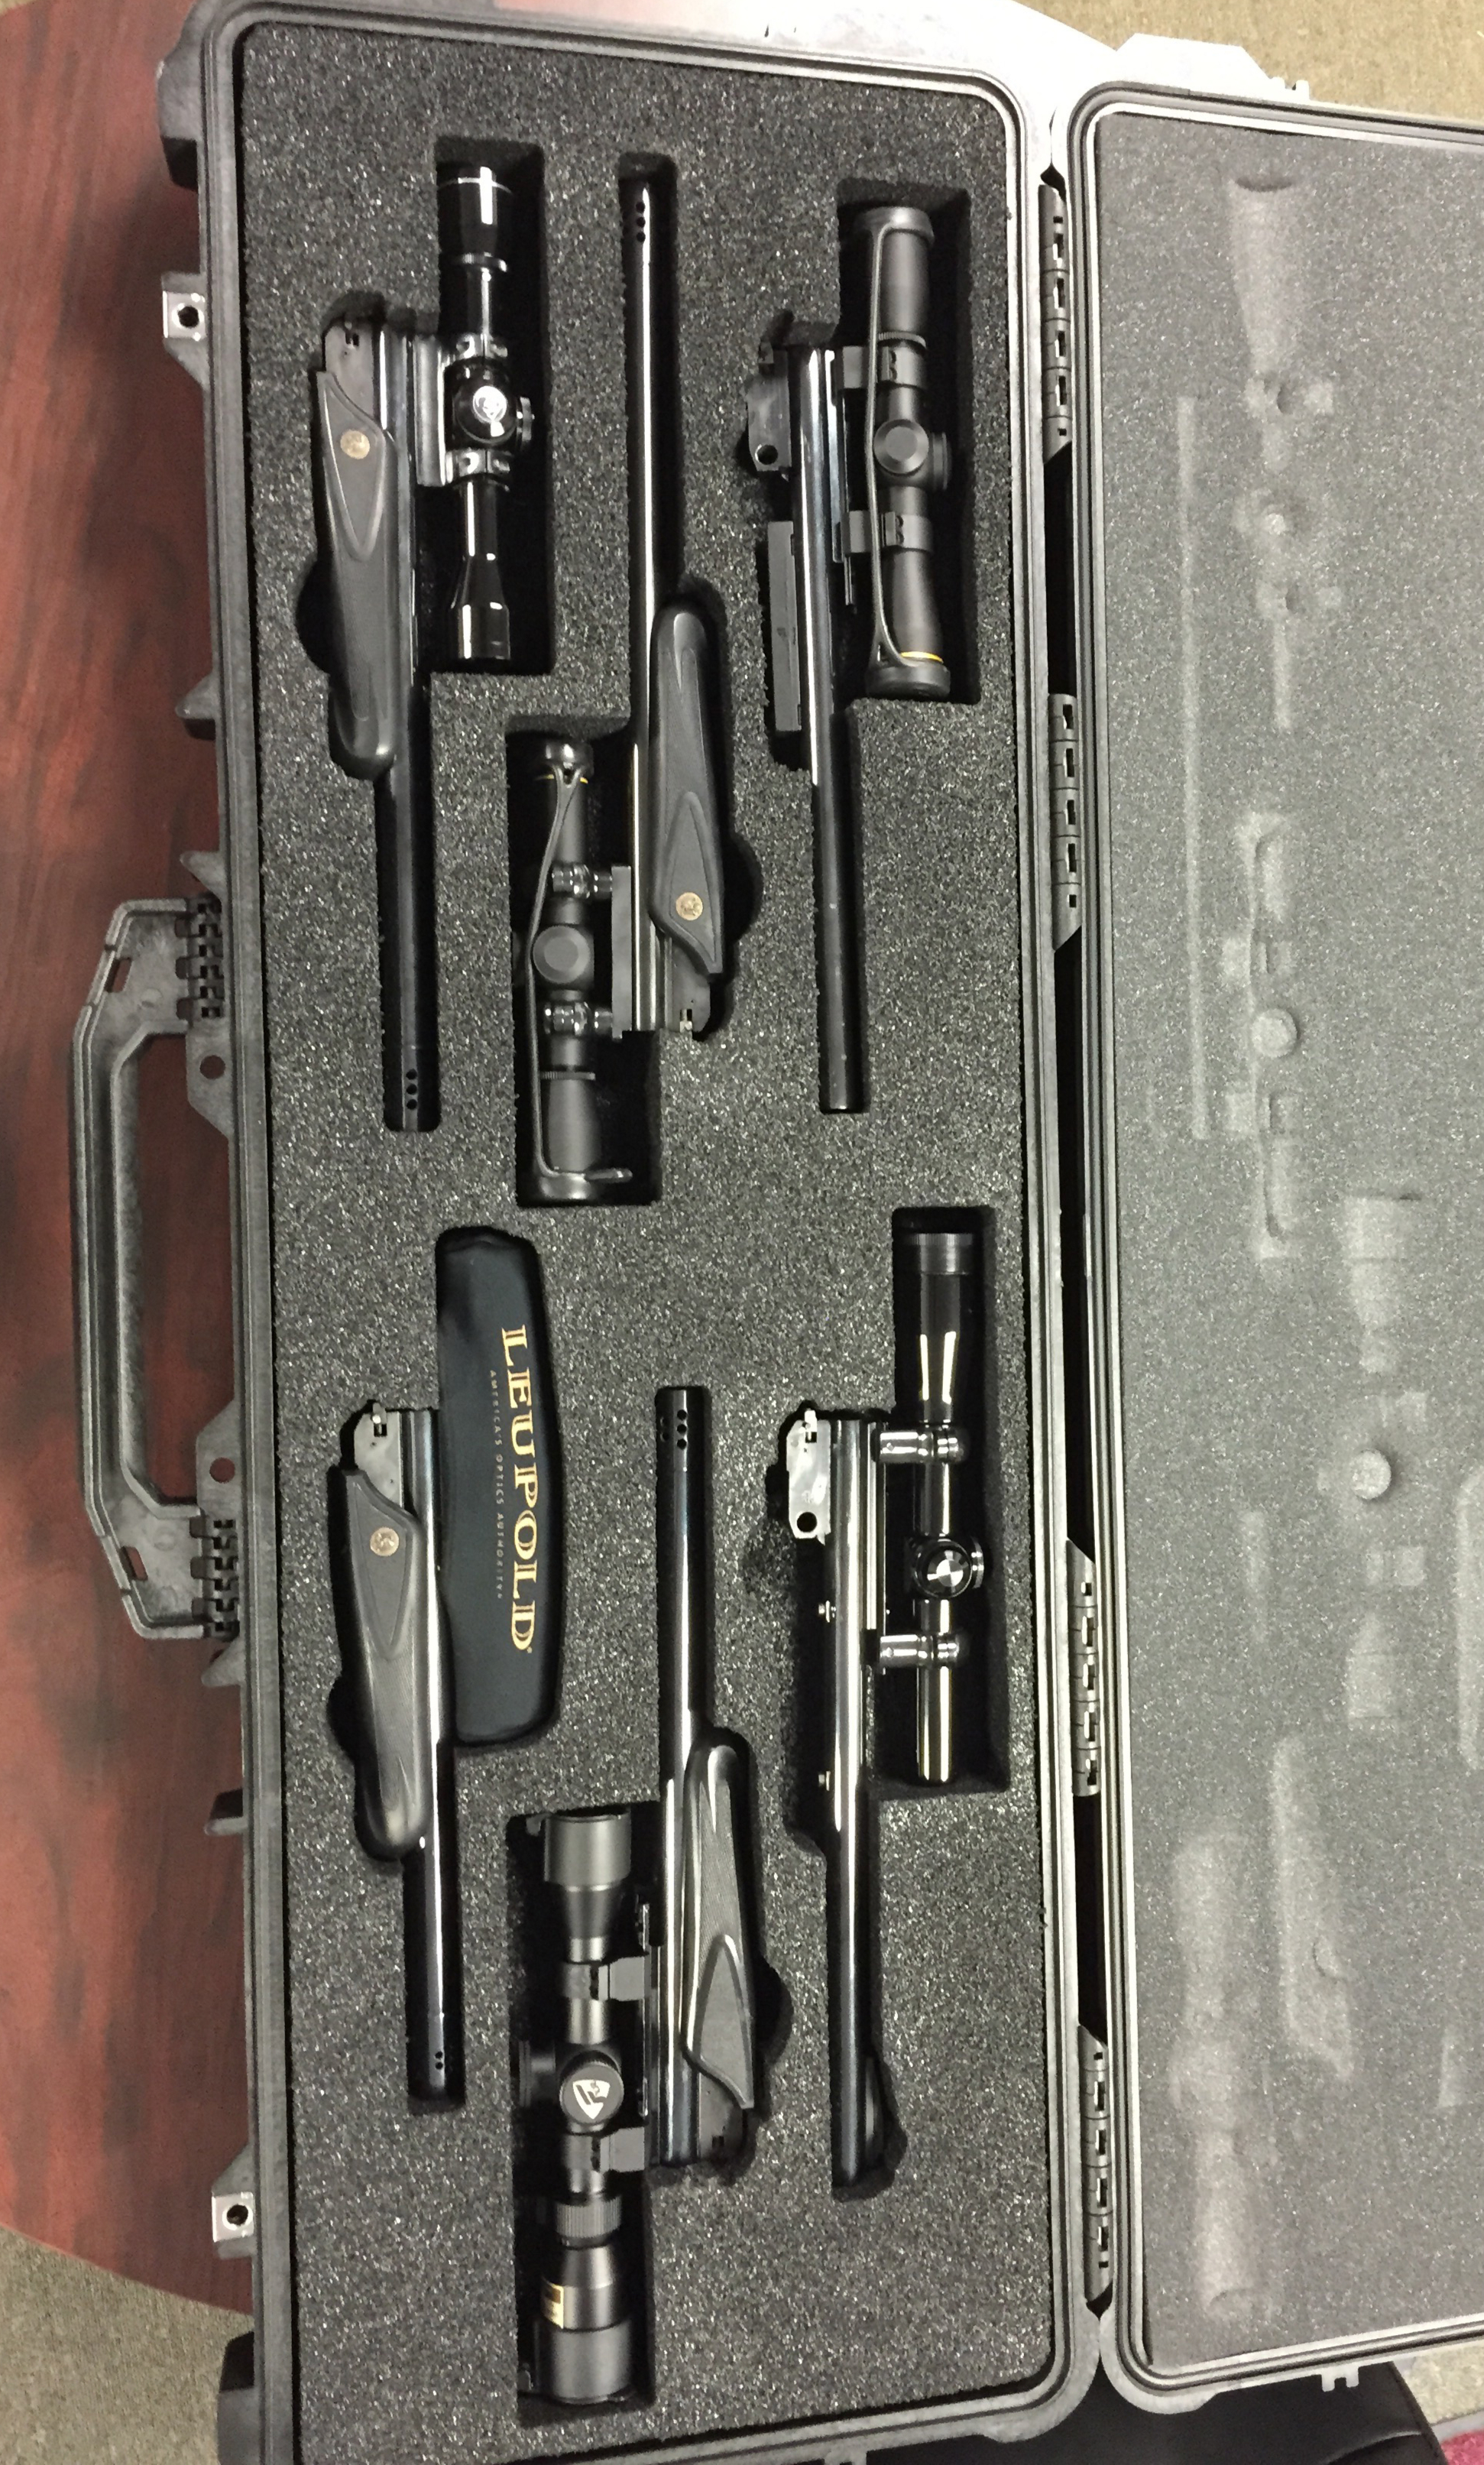 Weapons case